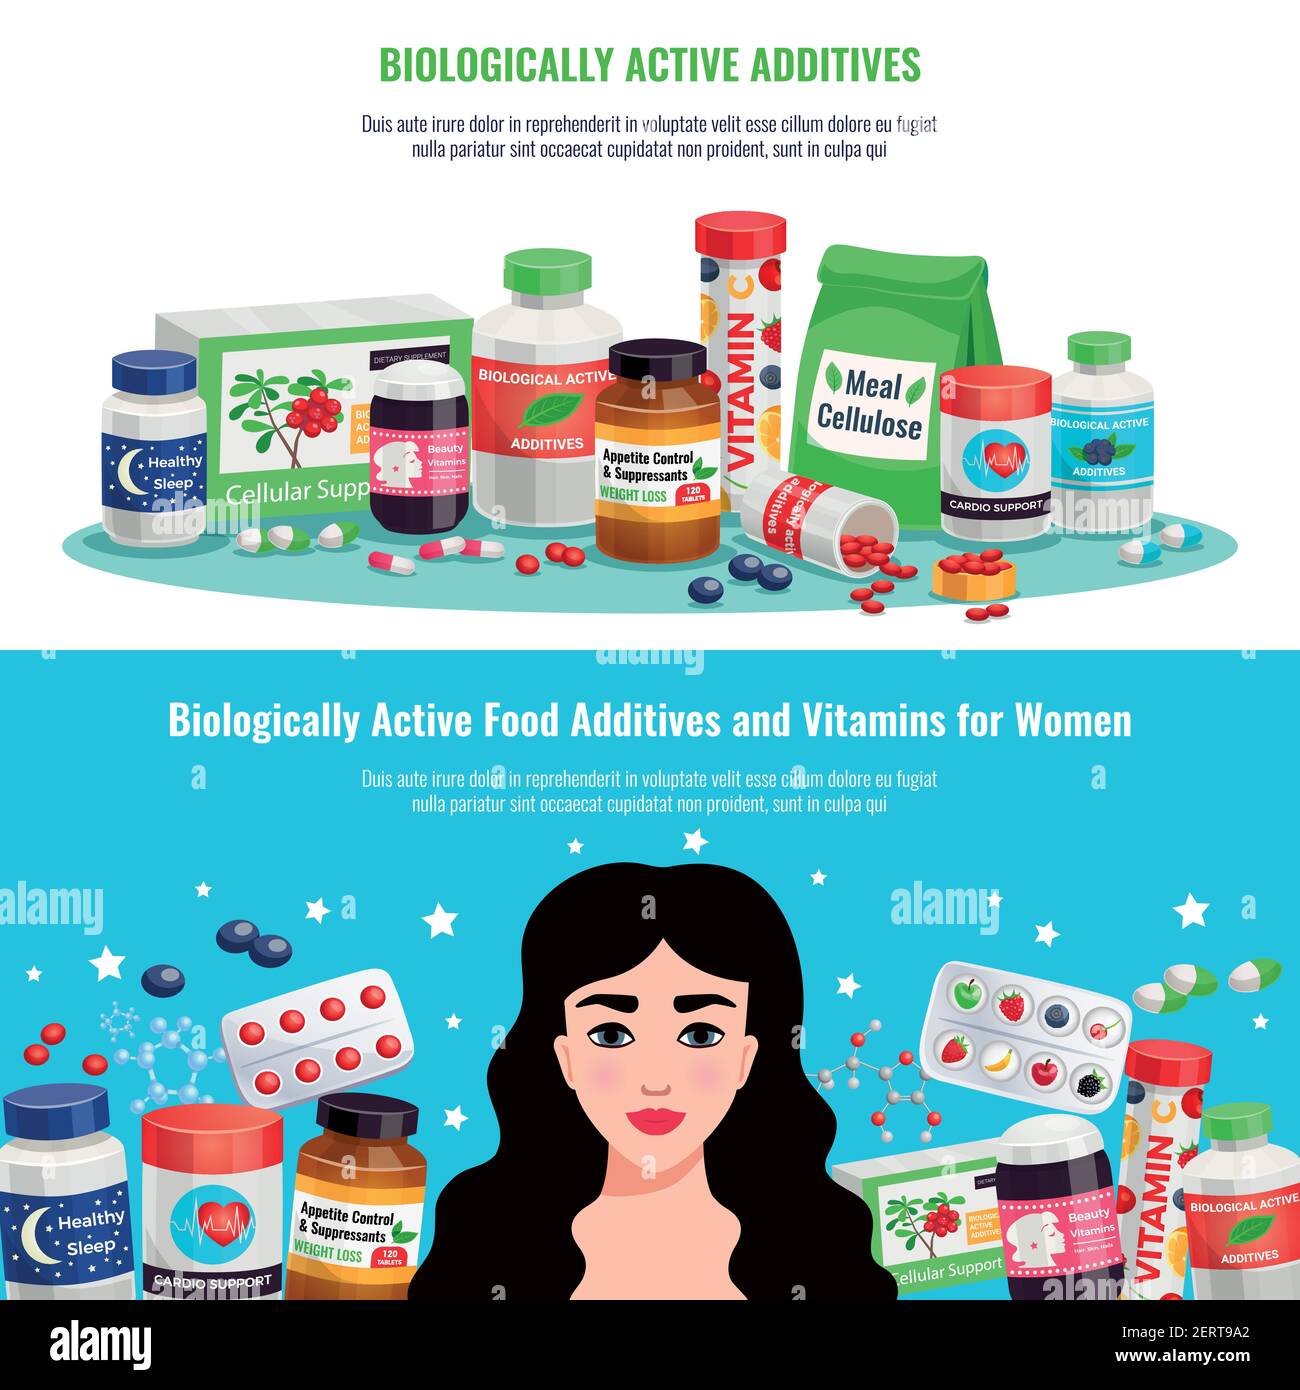 Biologically active food additives and vitamins for women health and beauty horizontal banners cartoon vector illustration Stock Vector